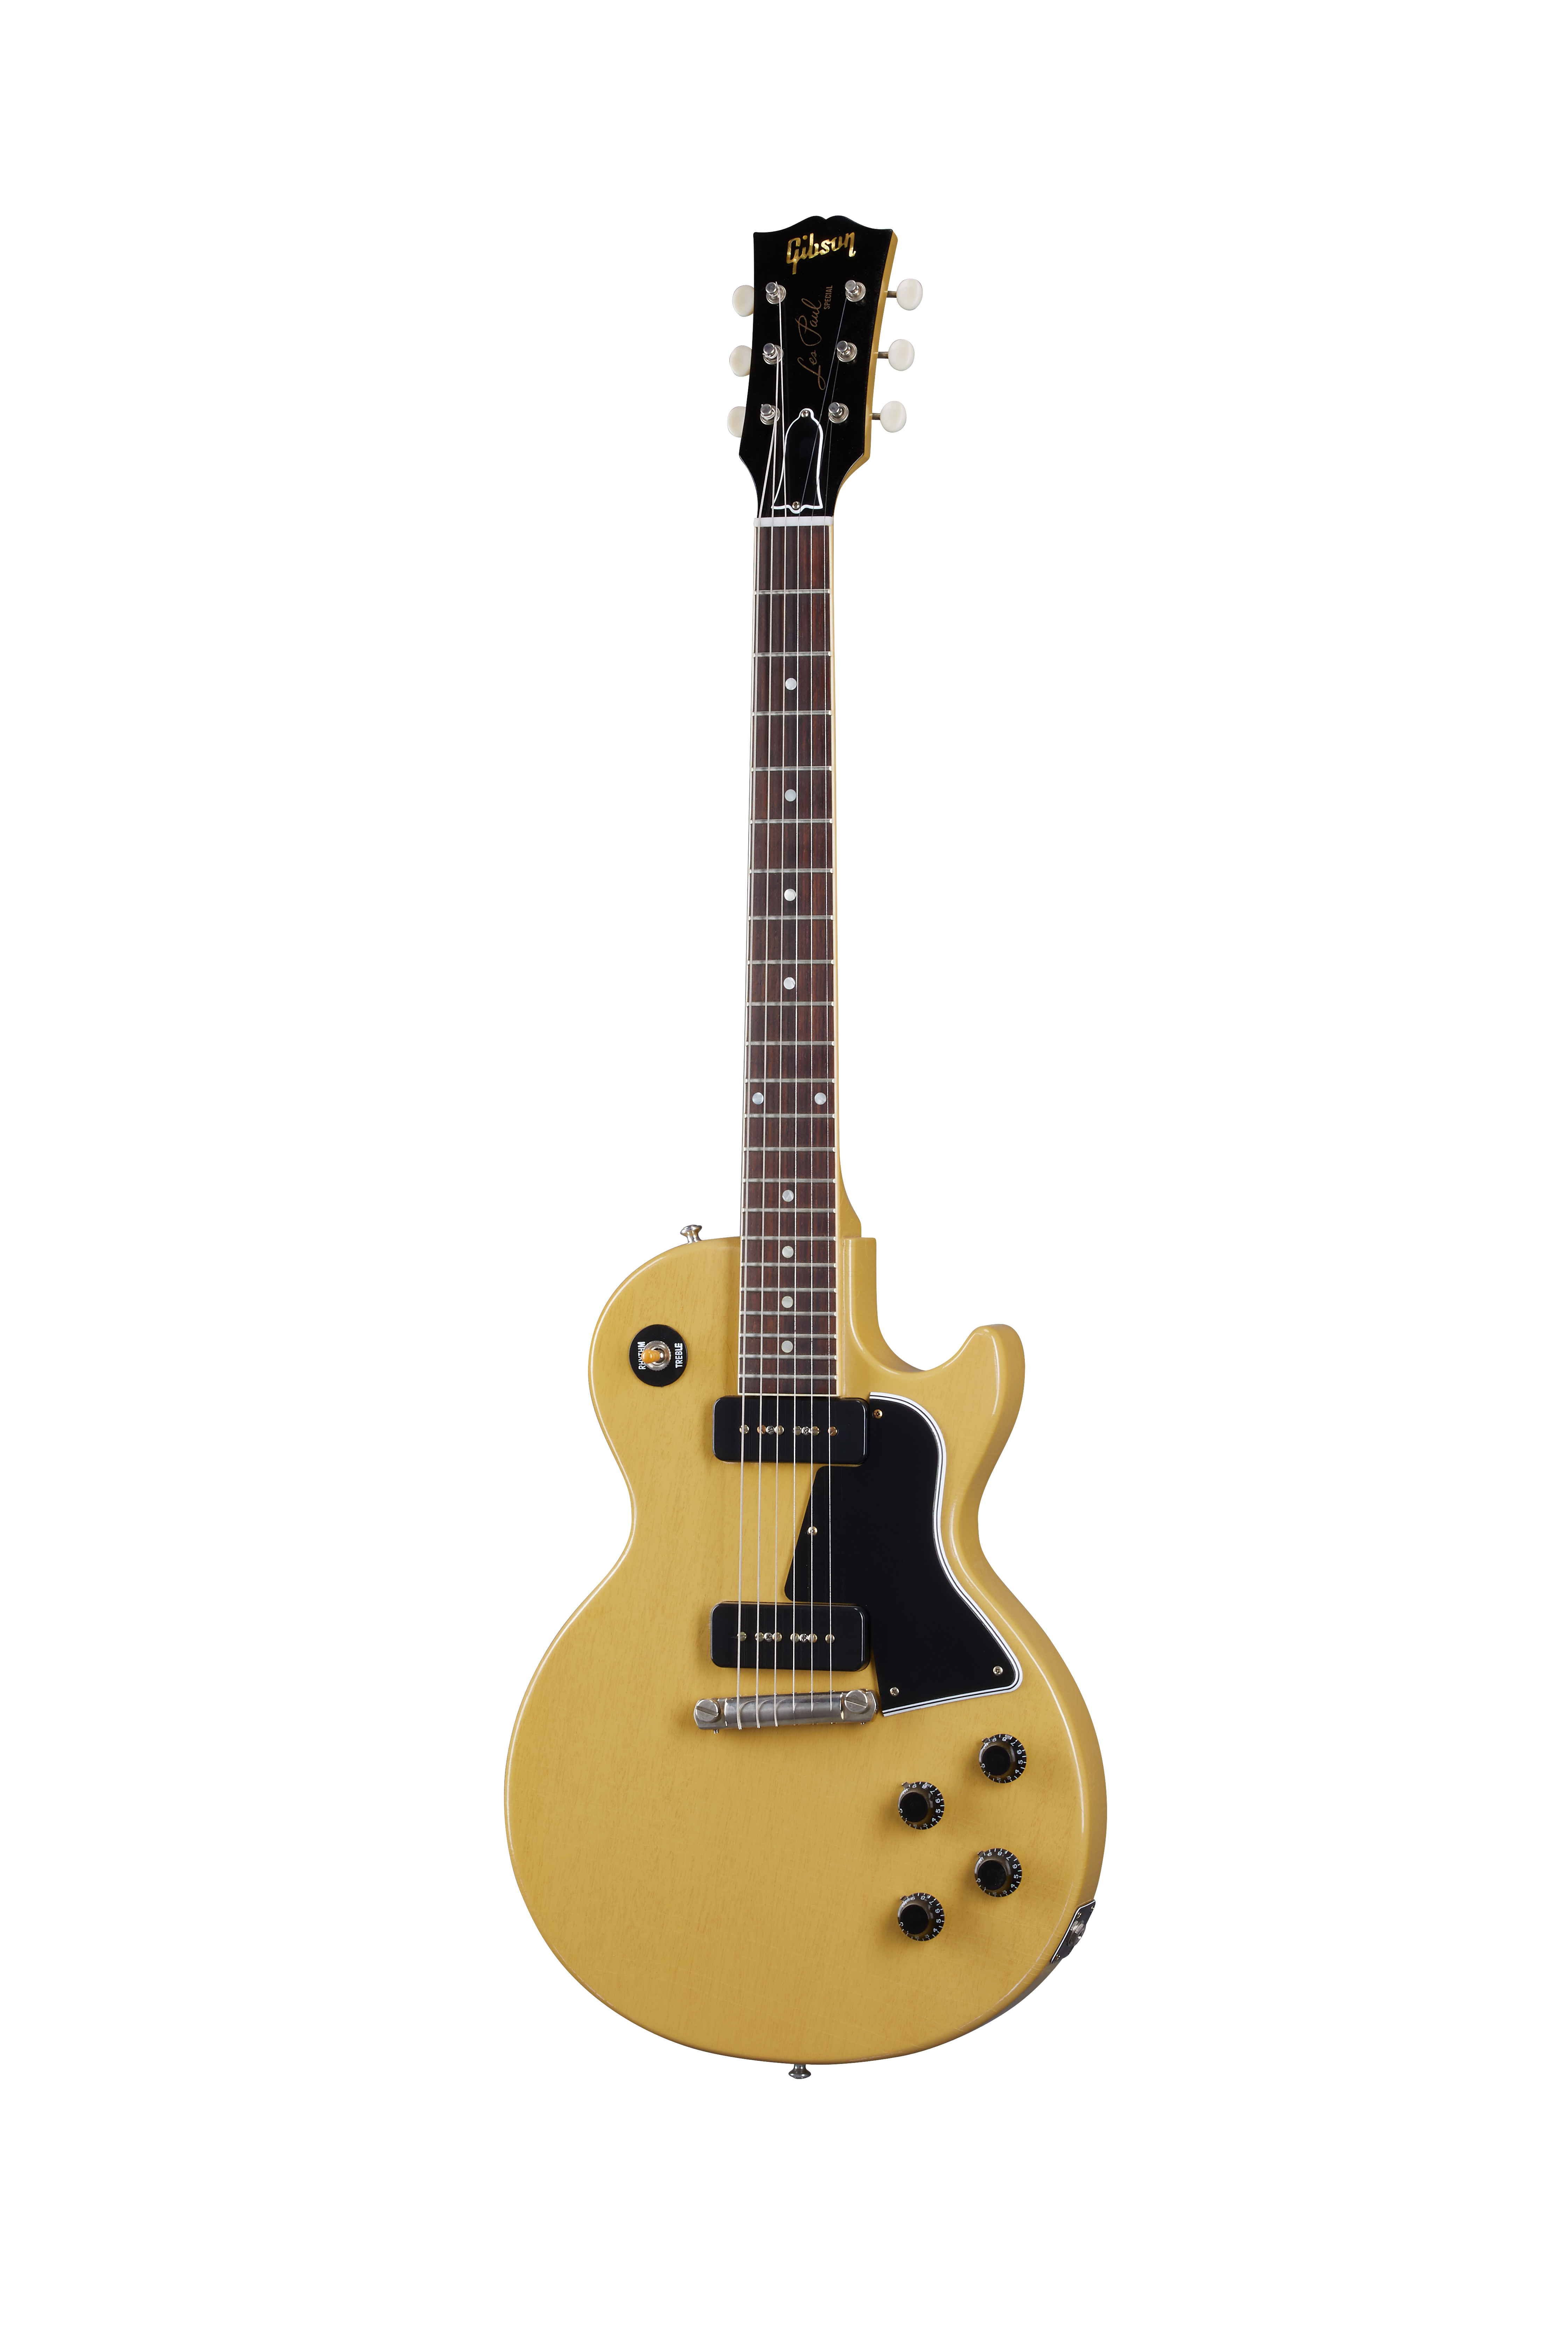 Gibson | 1957 Les Paul Special Single Cut TV Yellow Ultra Light Aged